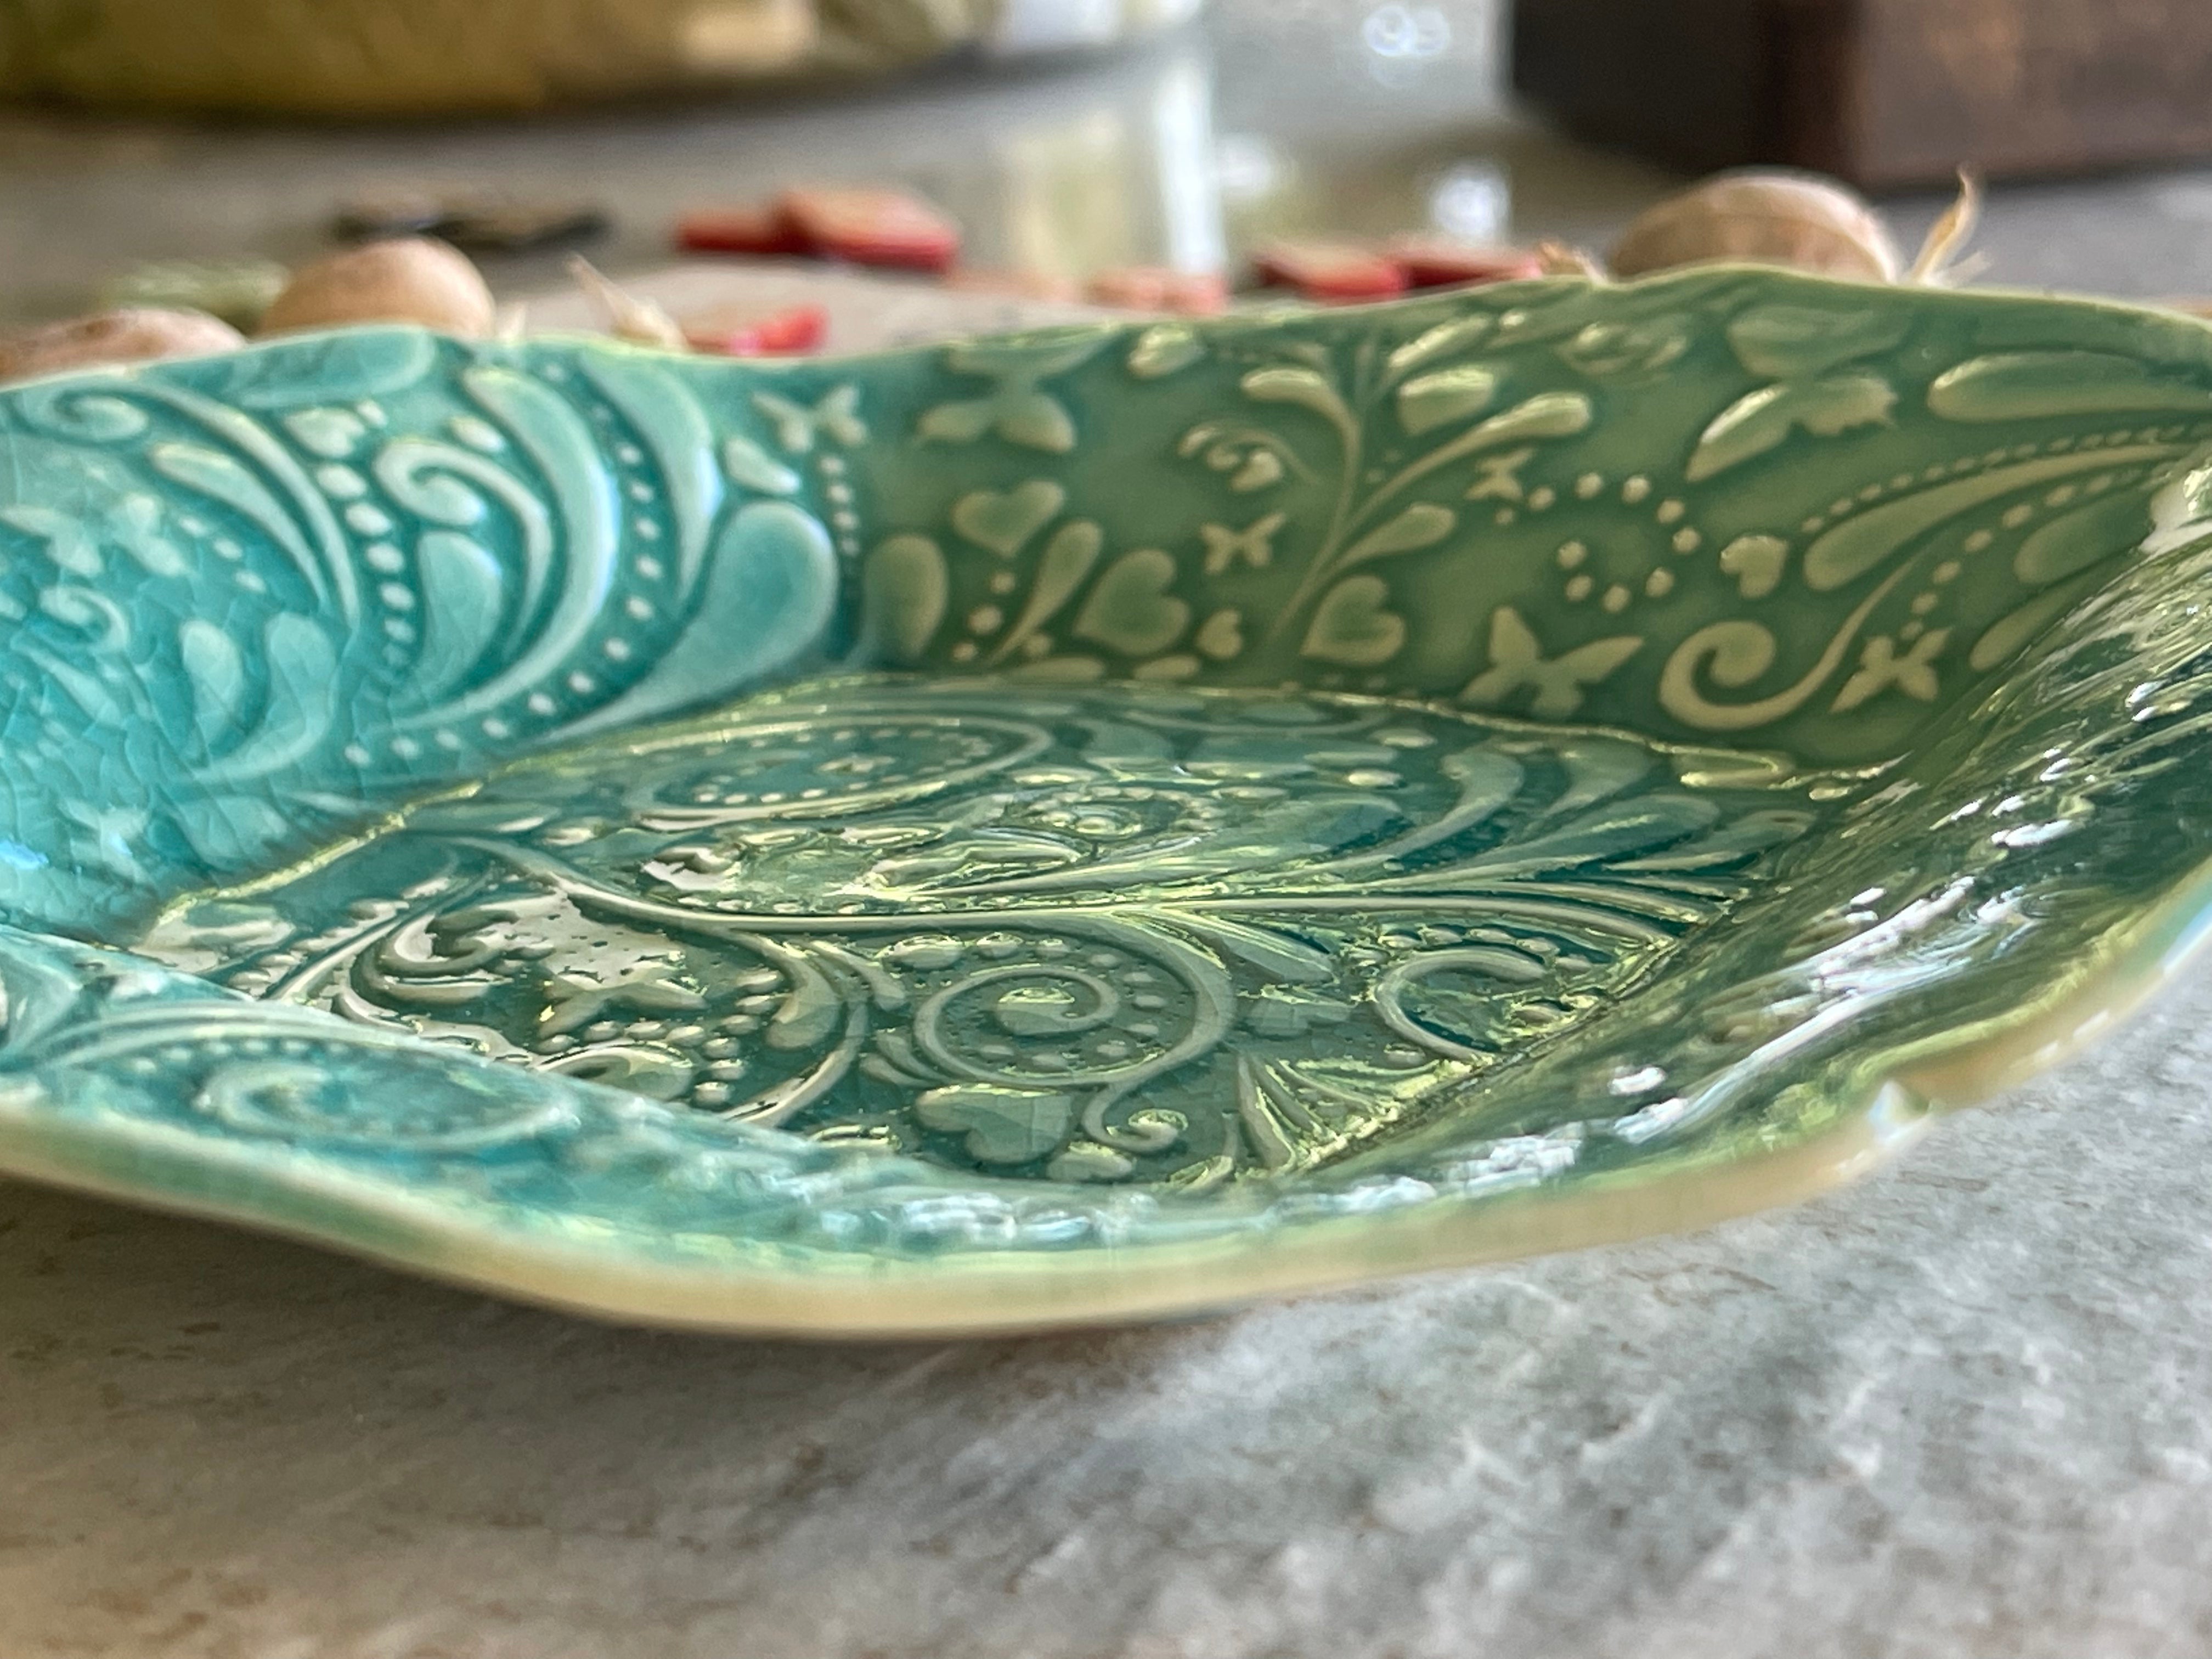 SECOND! Medium Turquoise Blue Plate, Catch All Plate, Decorative Dish